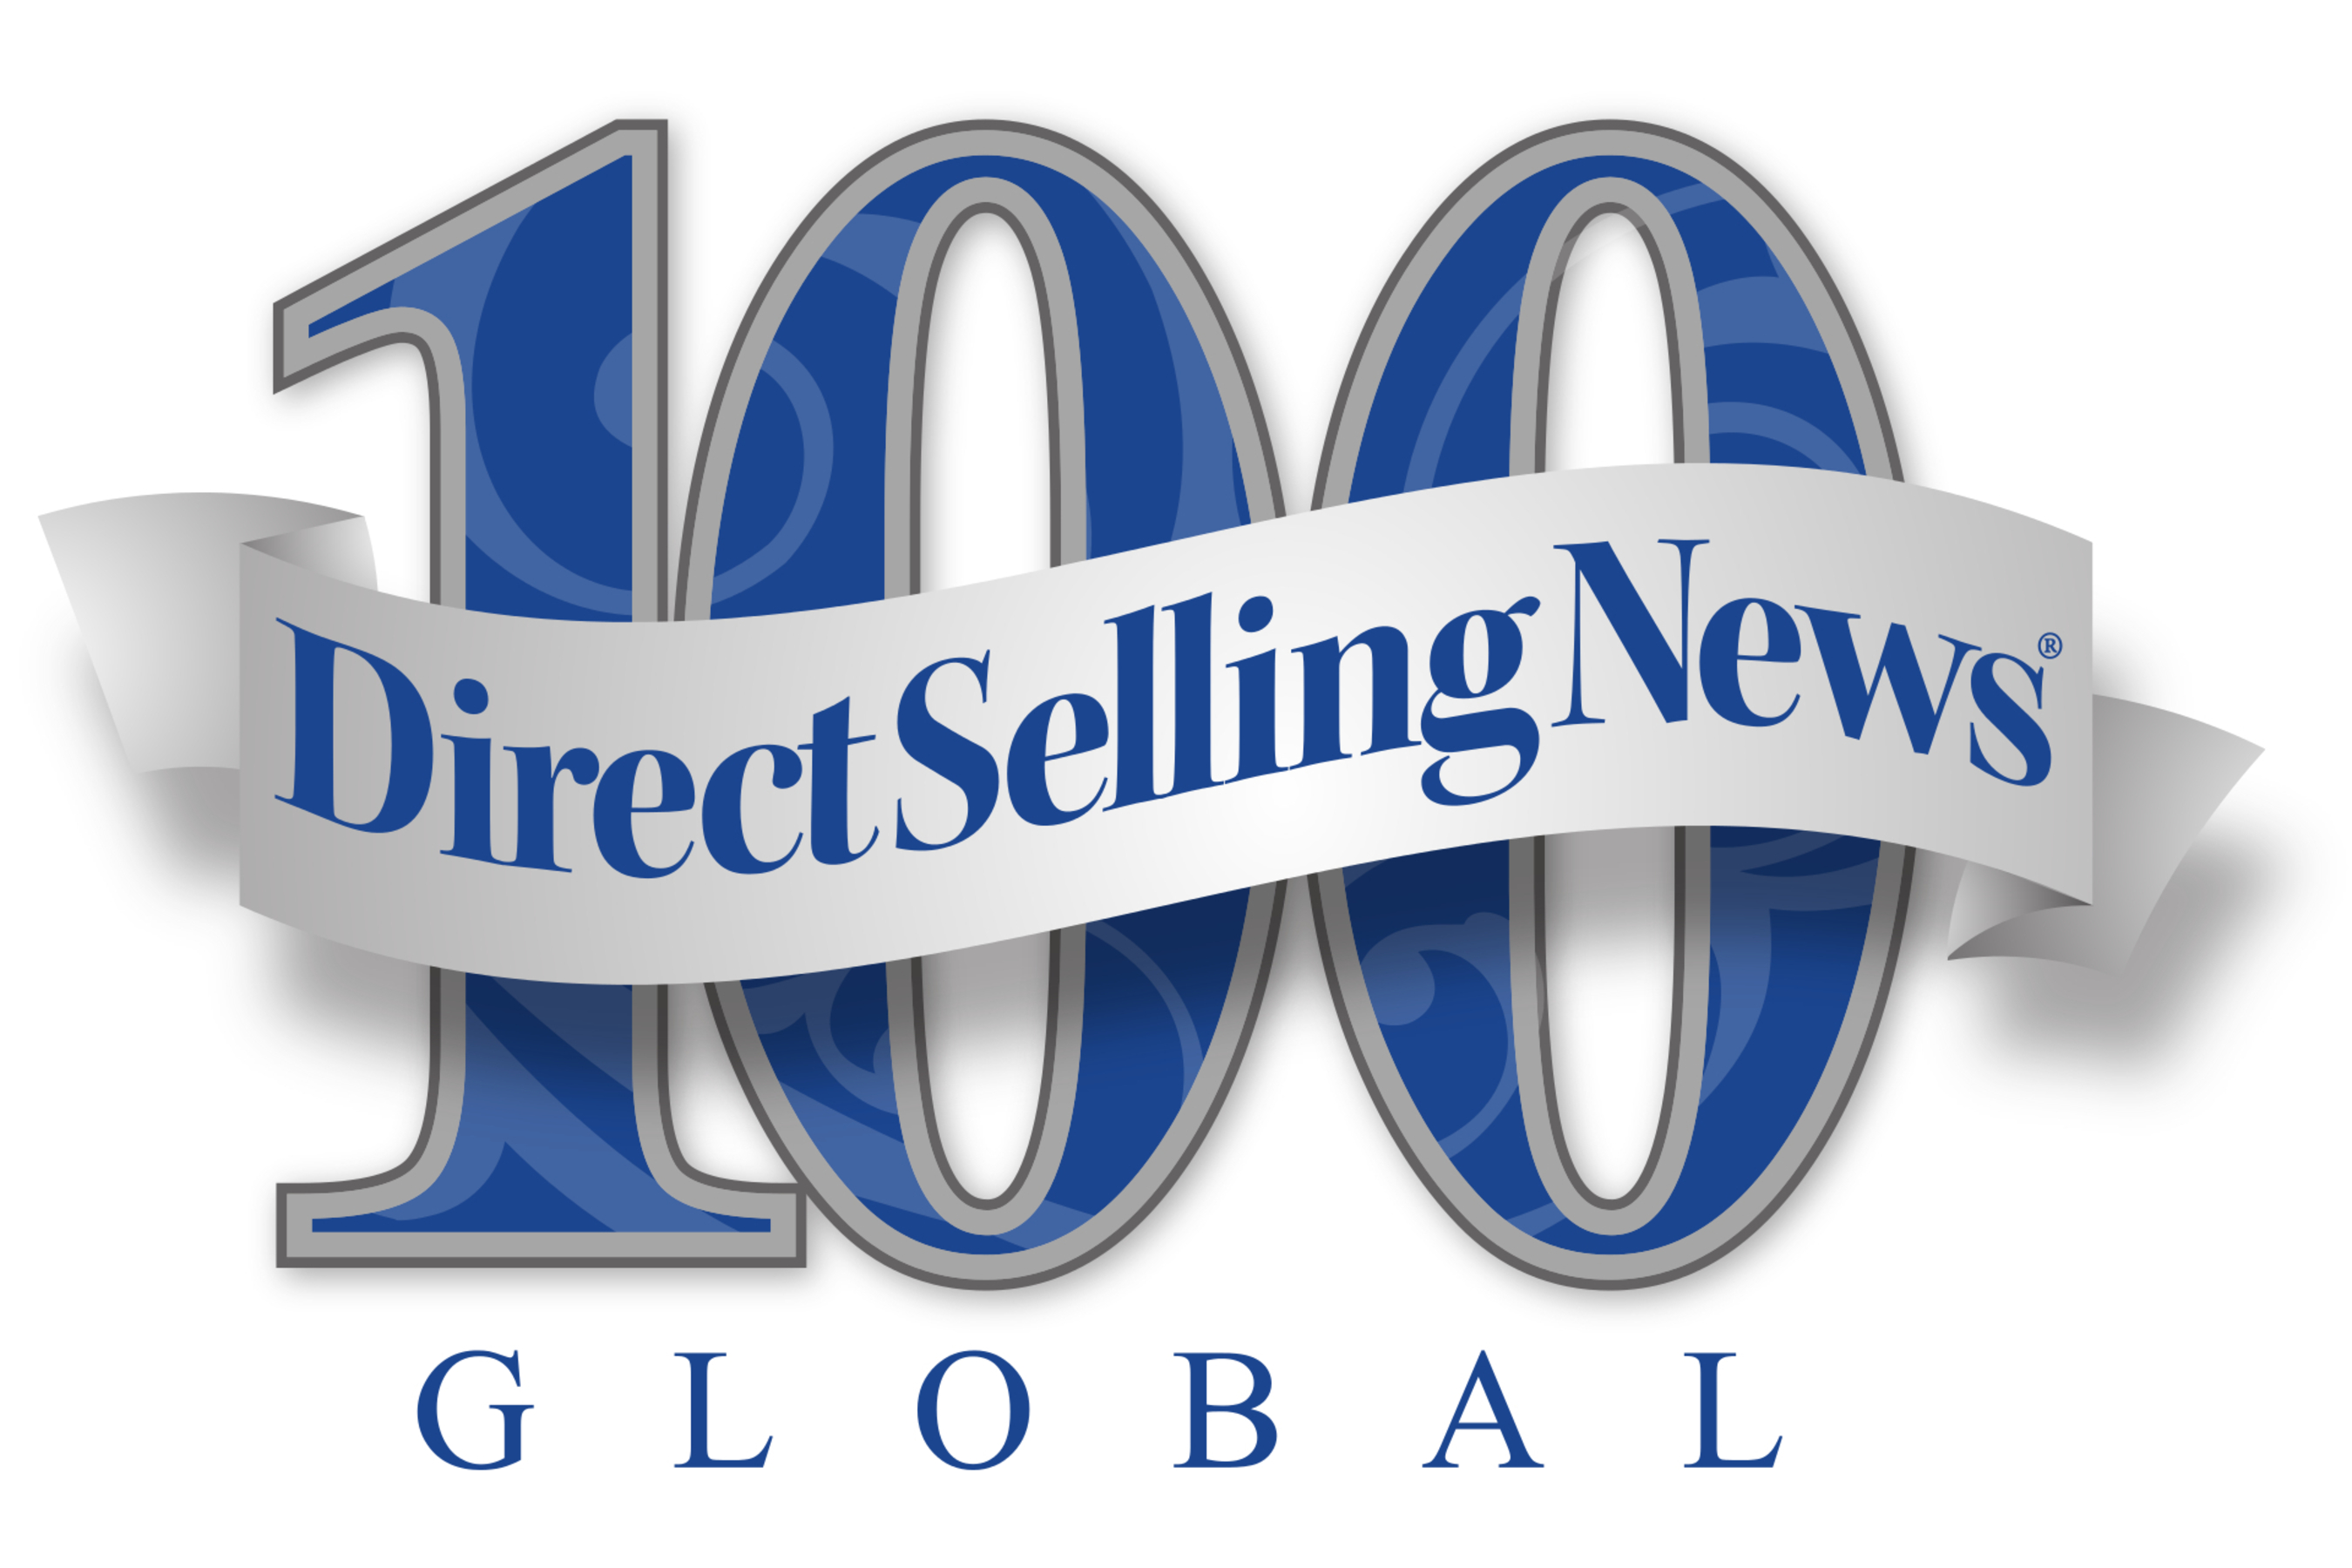 Nerium International Recognized for the Second Consecutive Year on Direct Selling News' Global Top 100 List  (PRNewsFoto/Nerium International)